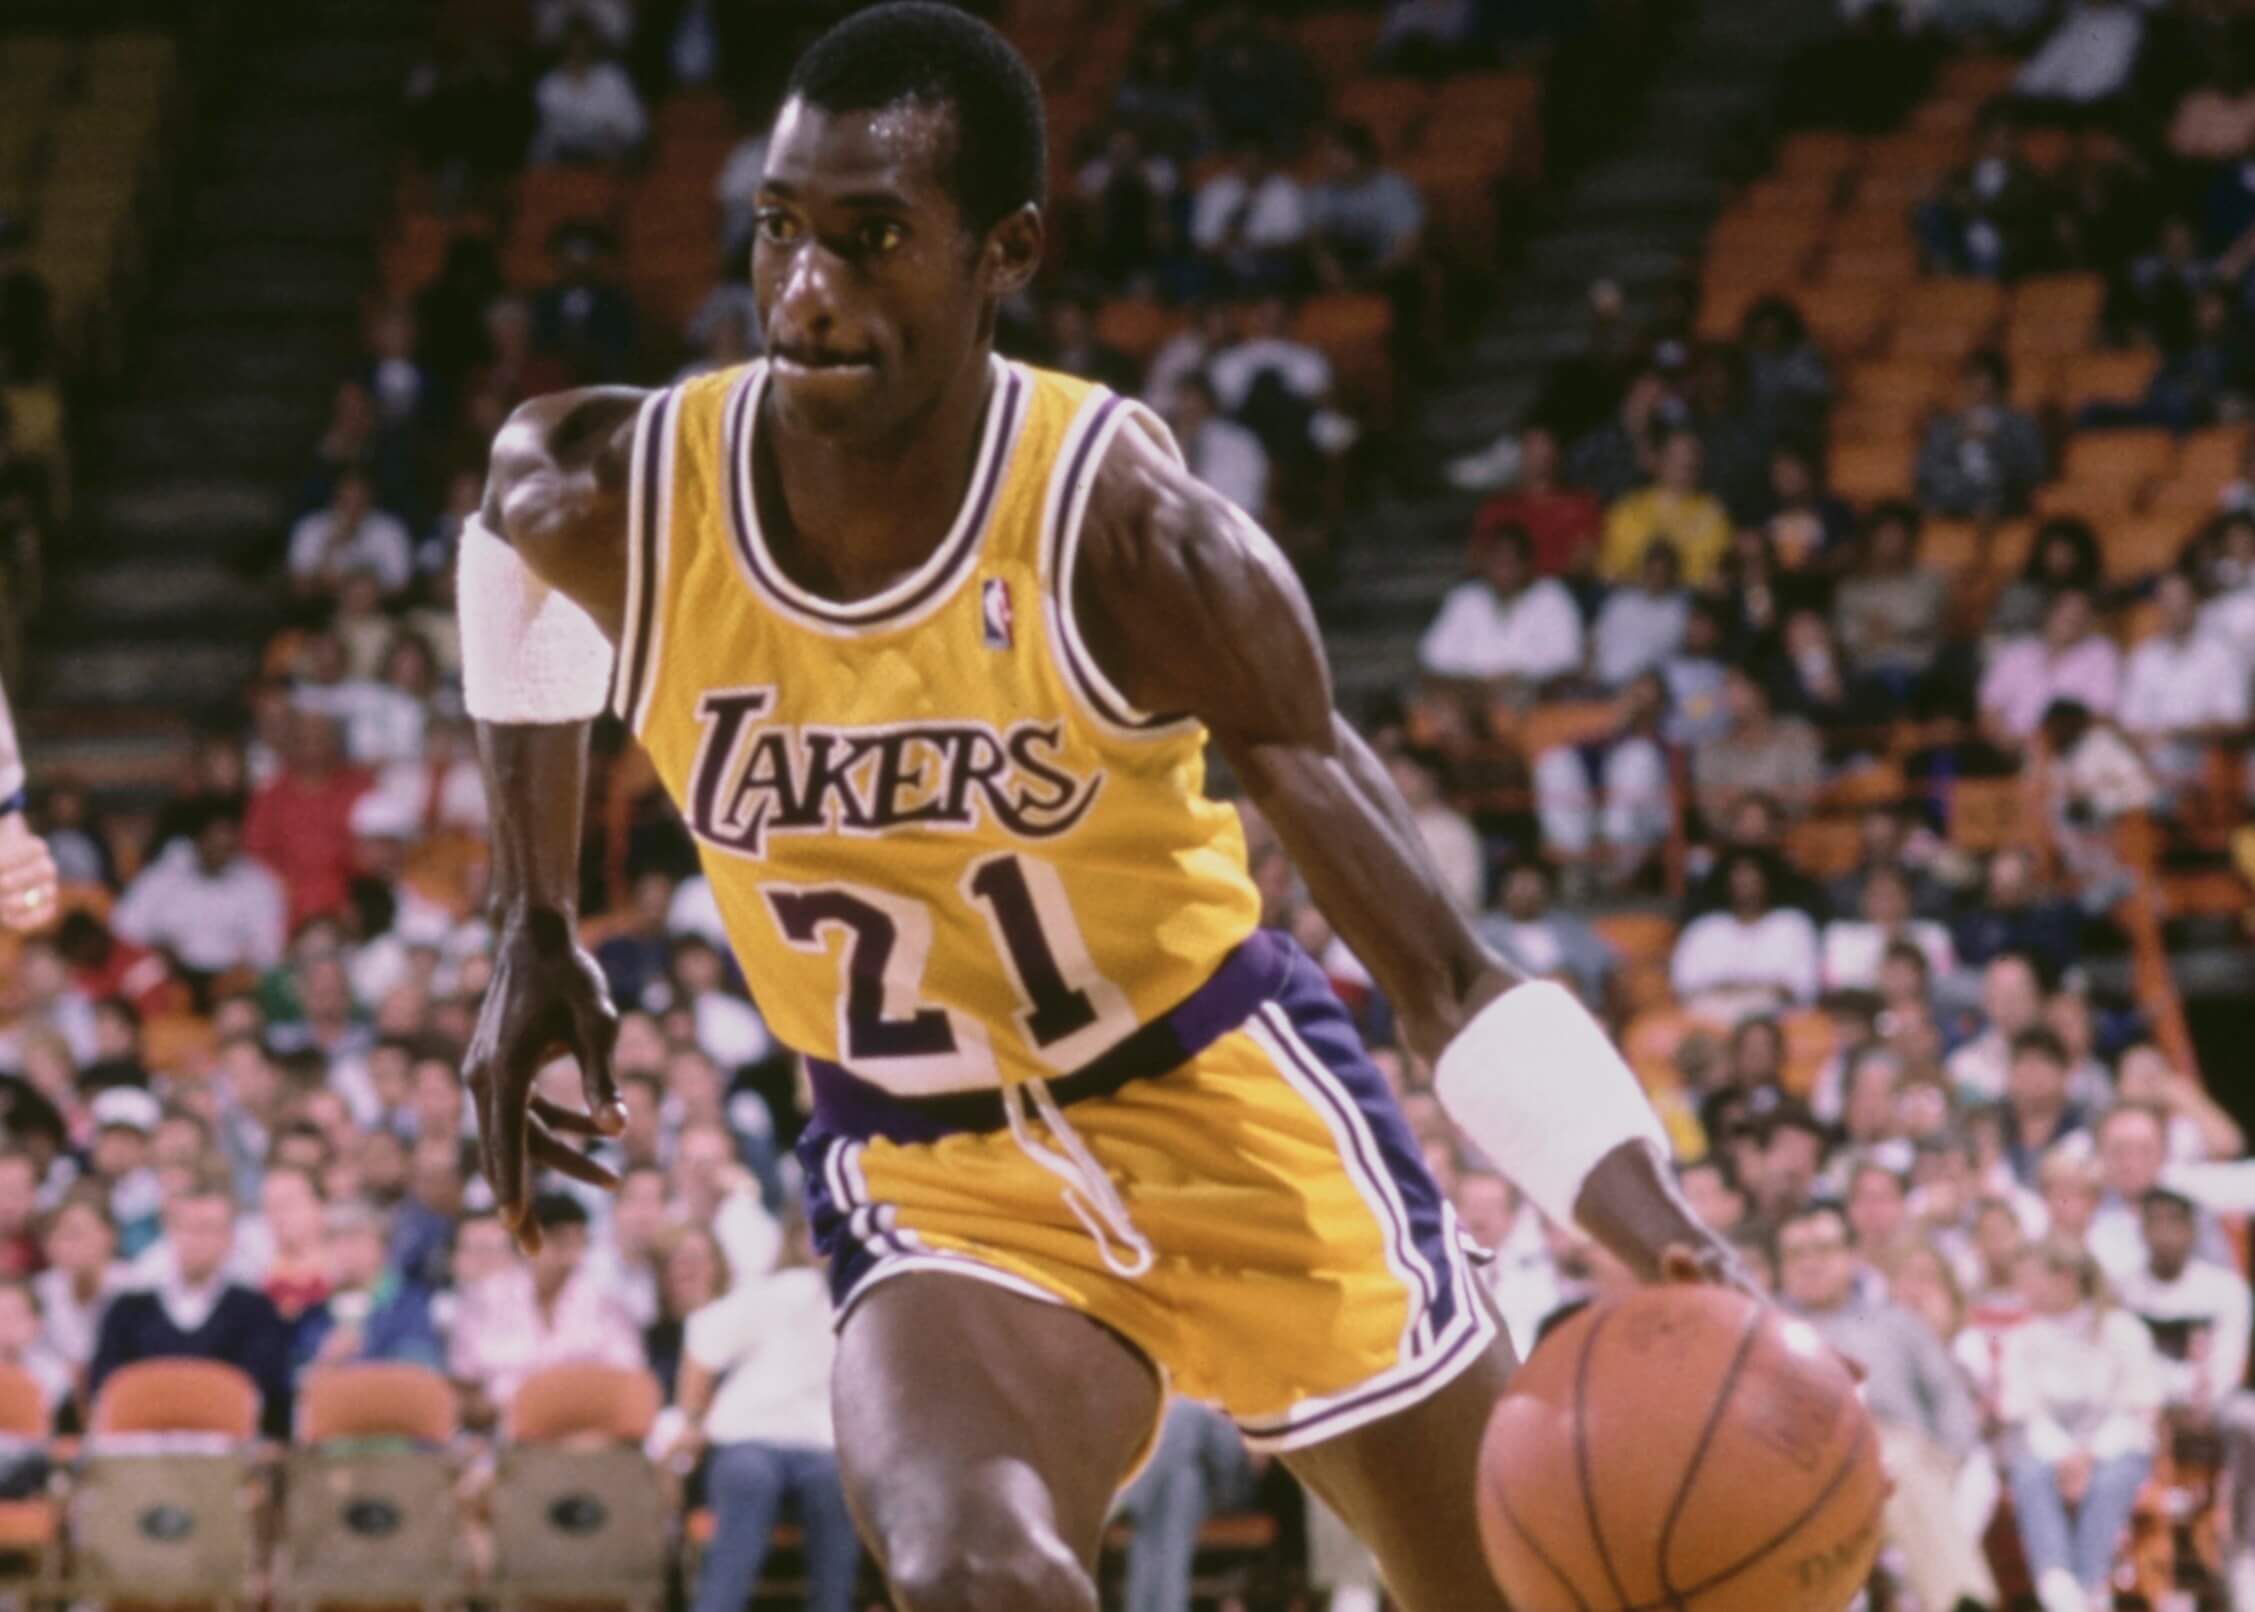 Michael Cooper of the Los Angeles Lakers dribbles the basketball.